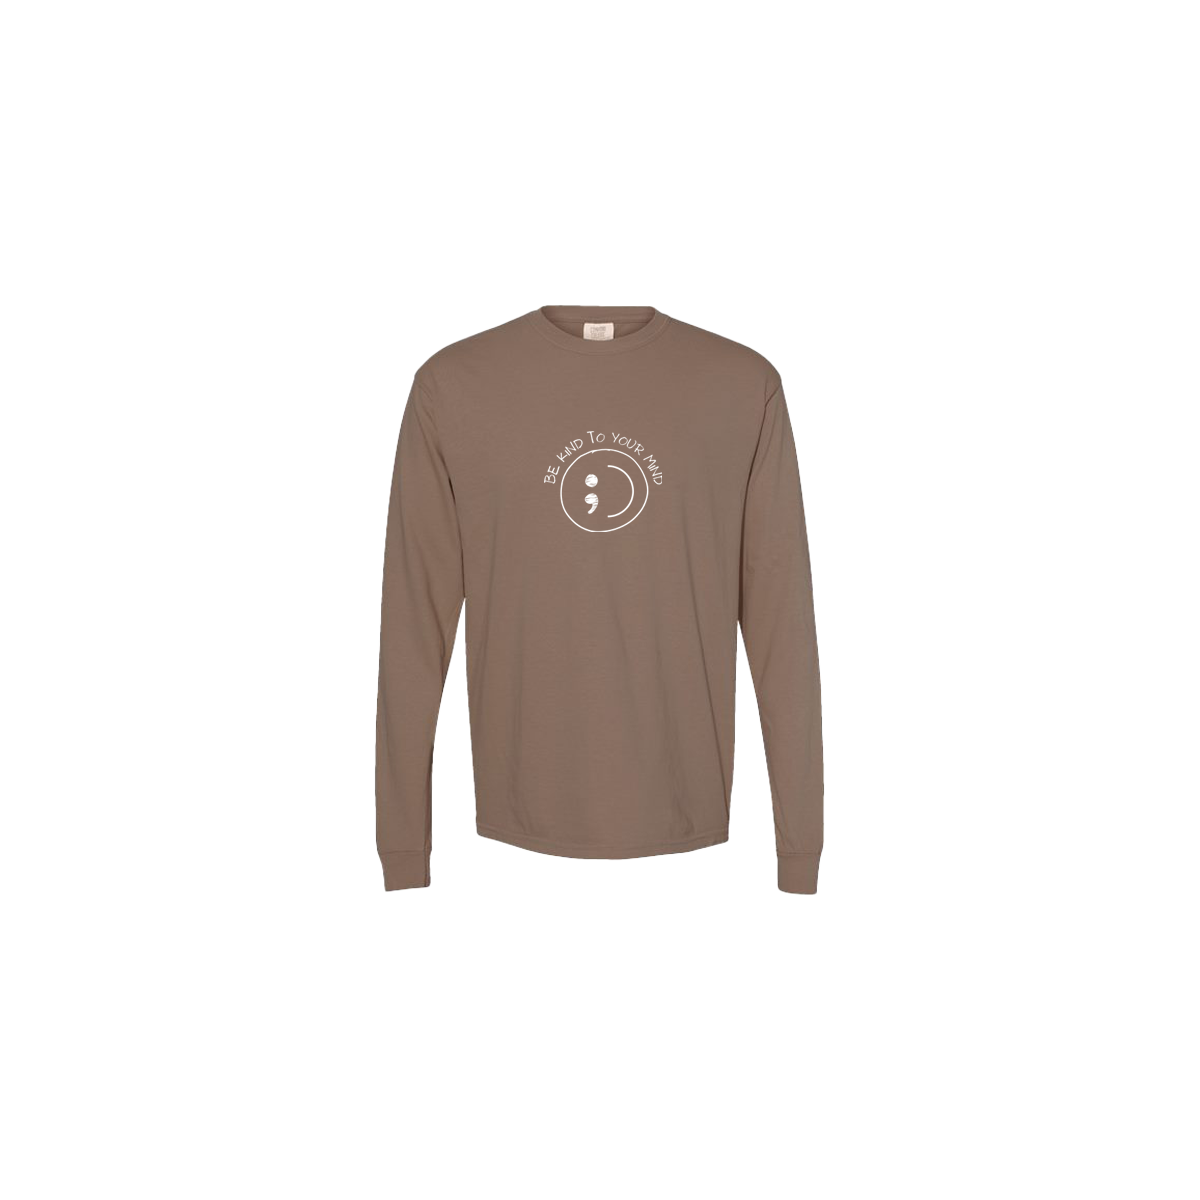 Be Kind To Your Mind Smiley Face Embroidered Brown Long Sleeve Tshirt - Mental Health Awareness Clothing